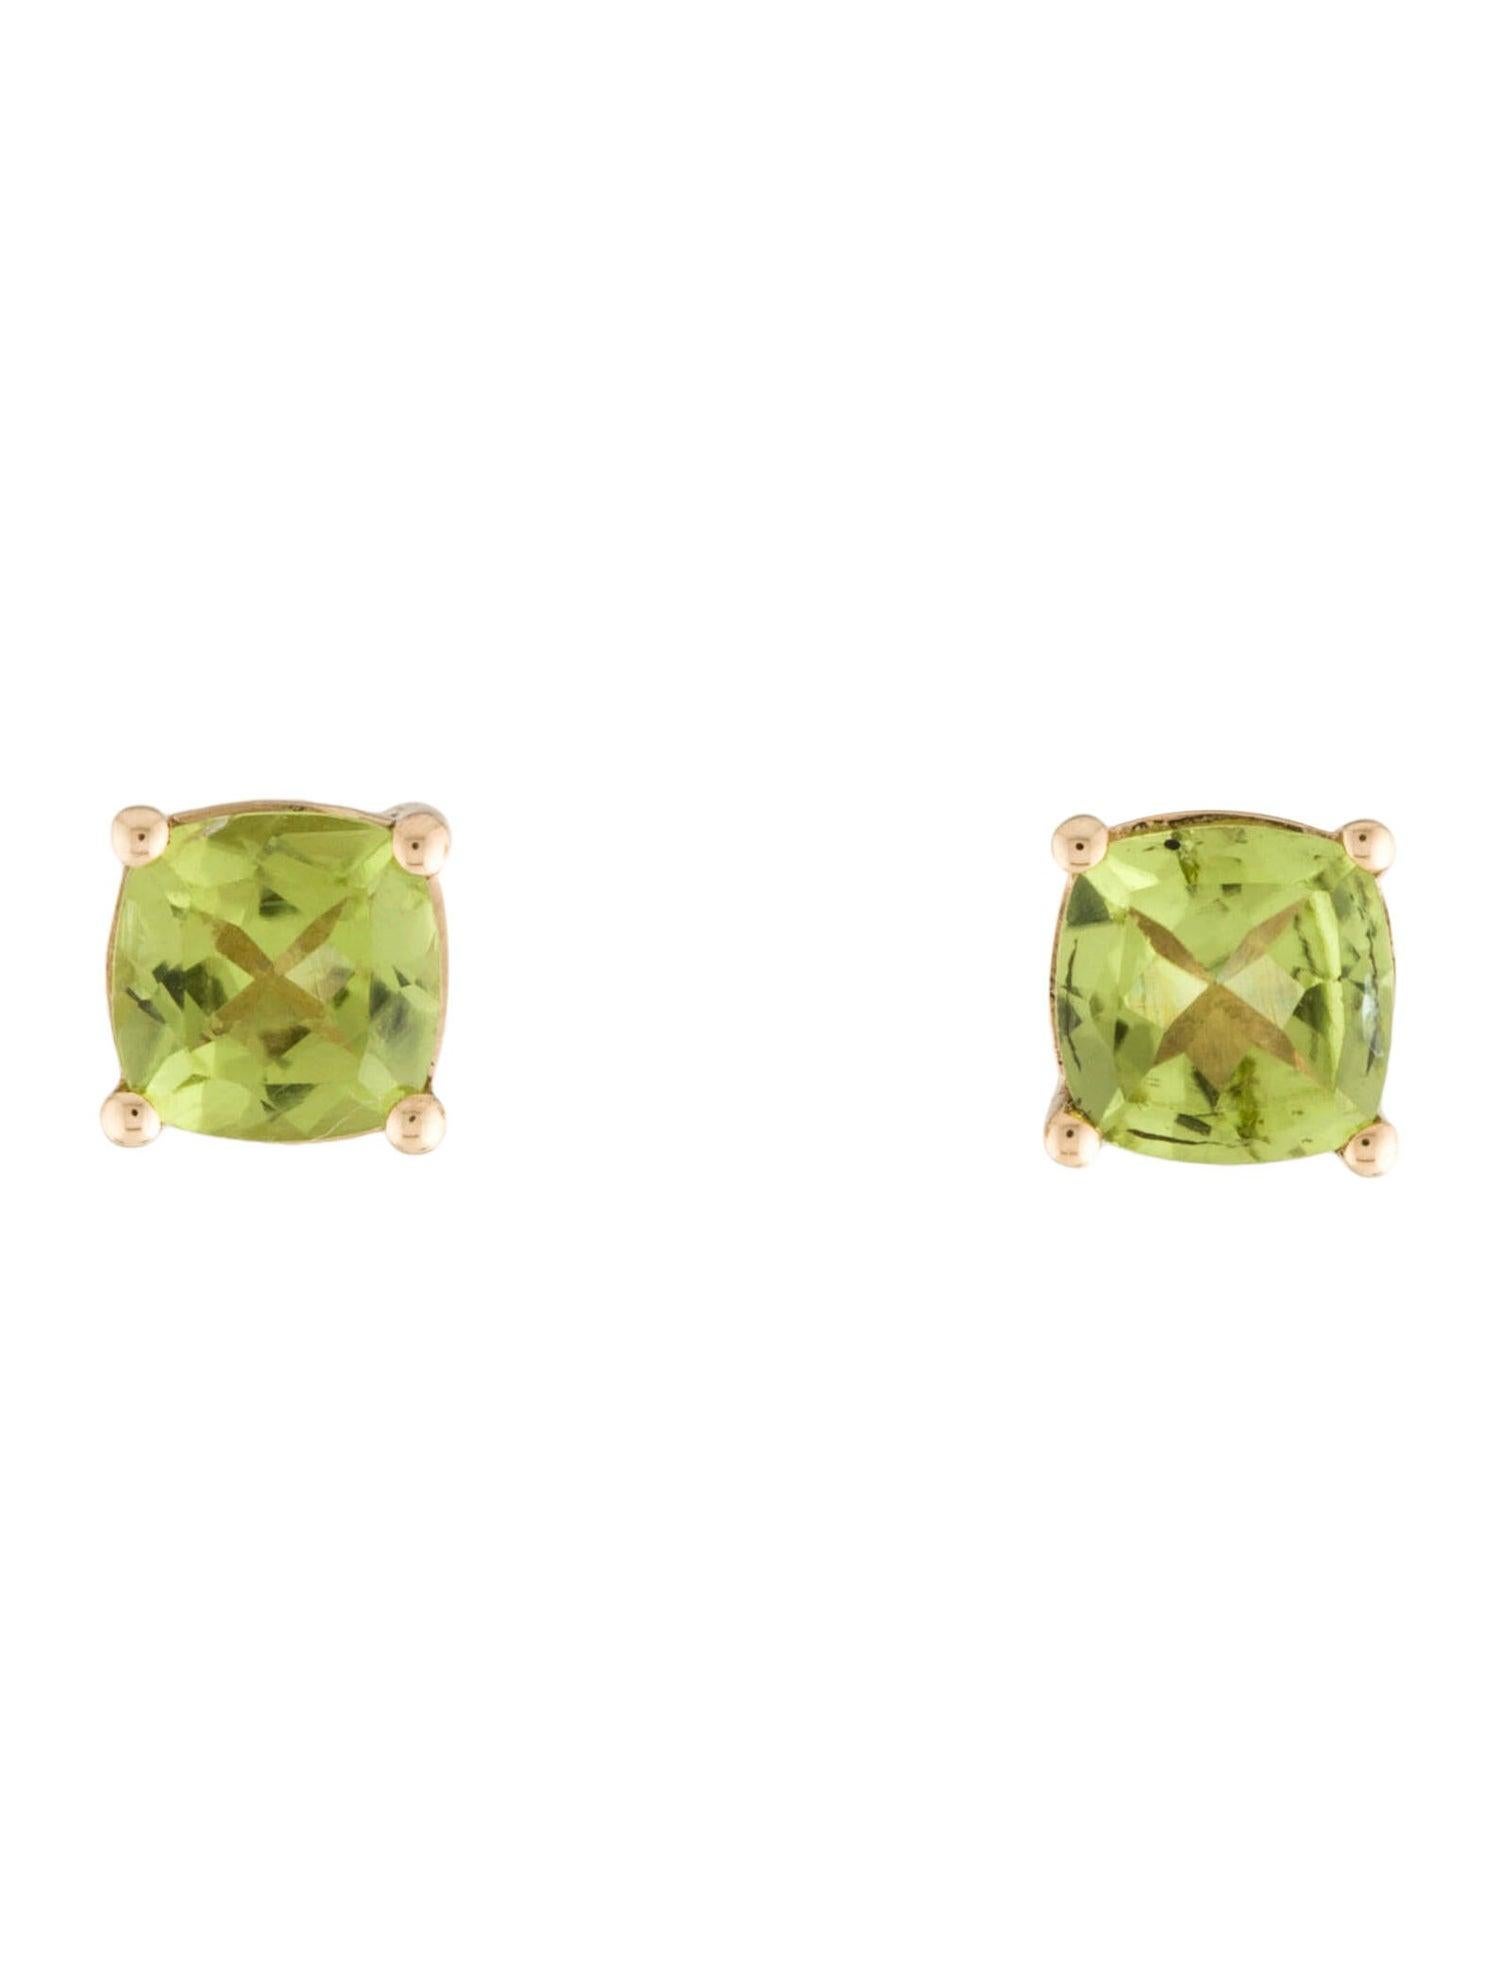 Experience the calming embrace of nature with our Harmony in Green Peridot Earrings. Crafted with exquisite attention to detail, these earrings are a testament to the seamless union of quality and artistry that defines Jeweltique.

Embrace the